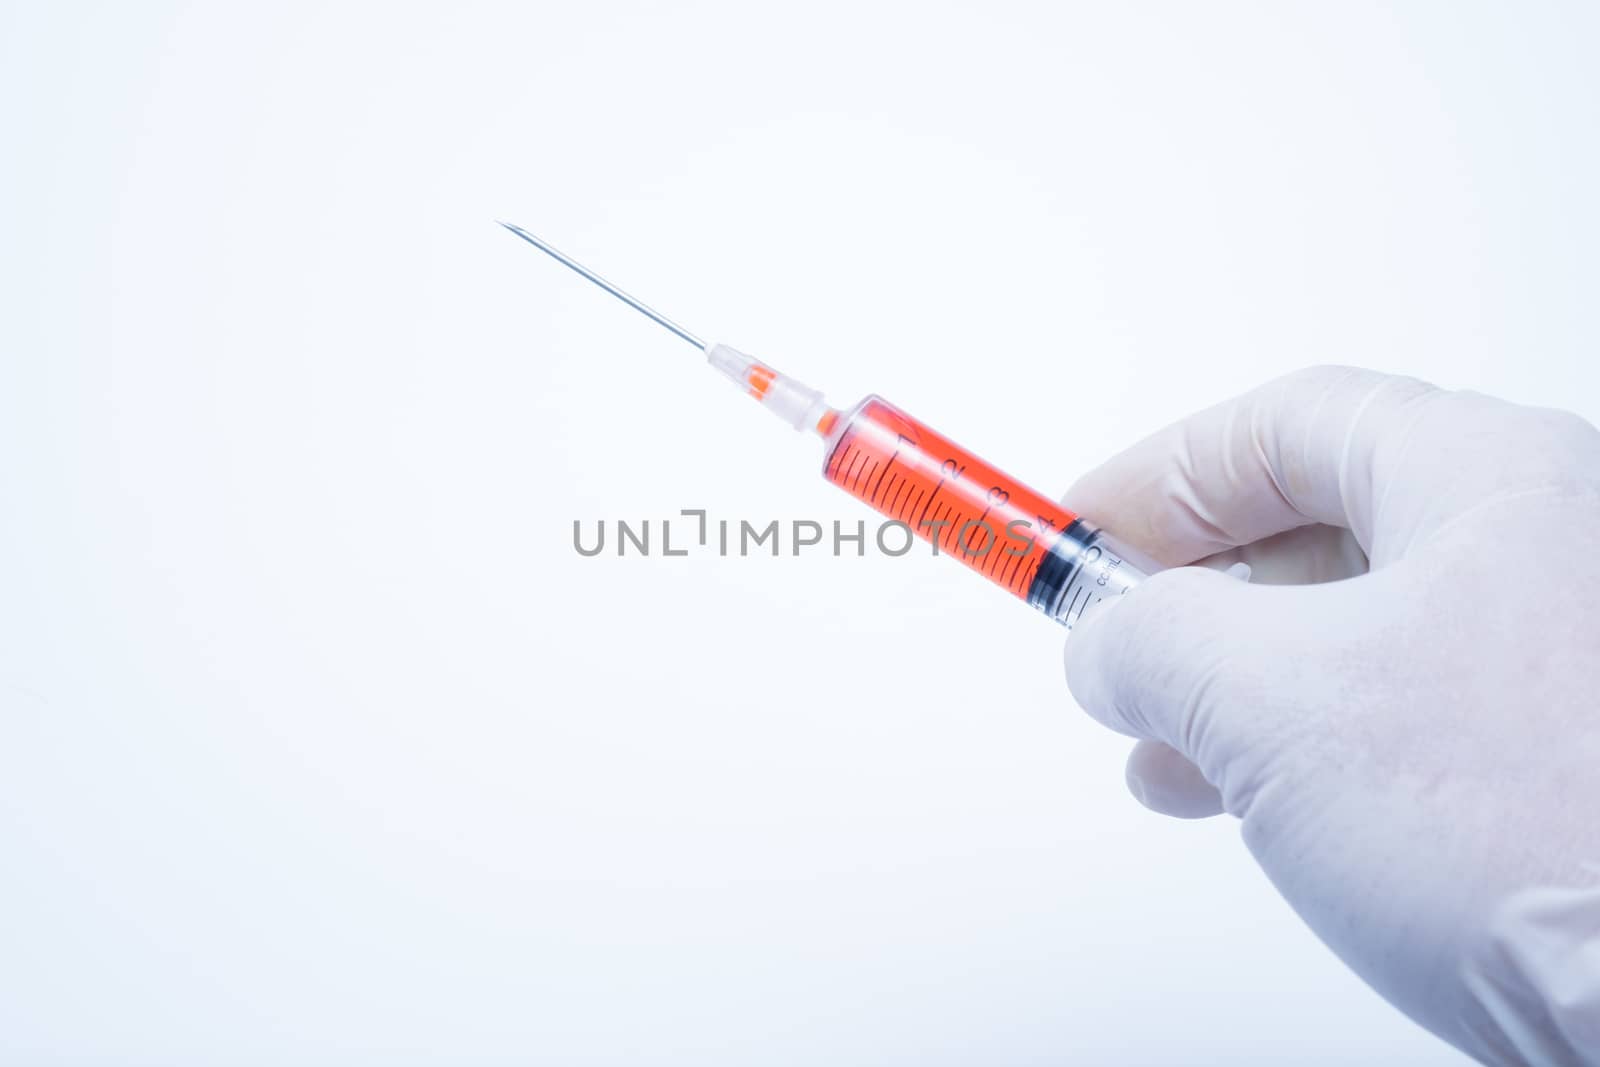 hand holding red vaccine syringe in white background, this photo made to cold mood tone.